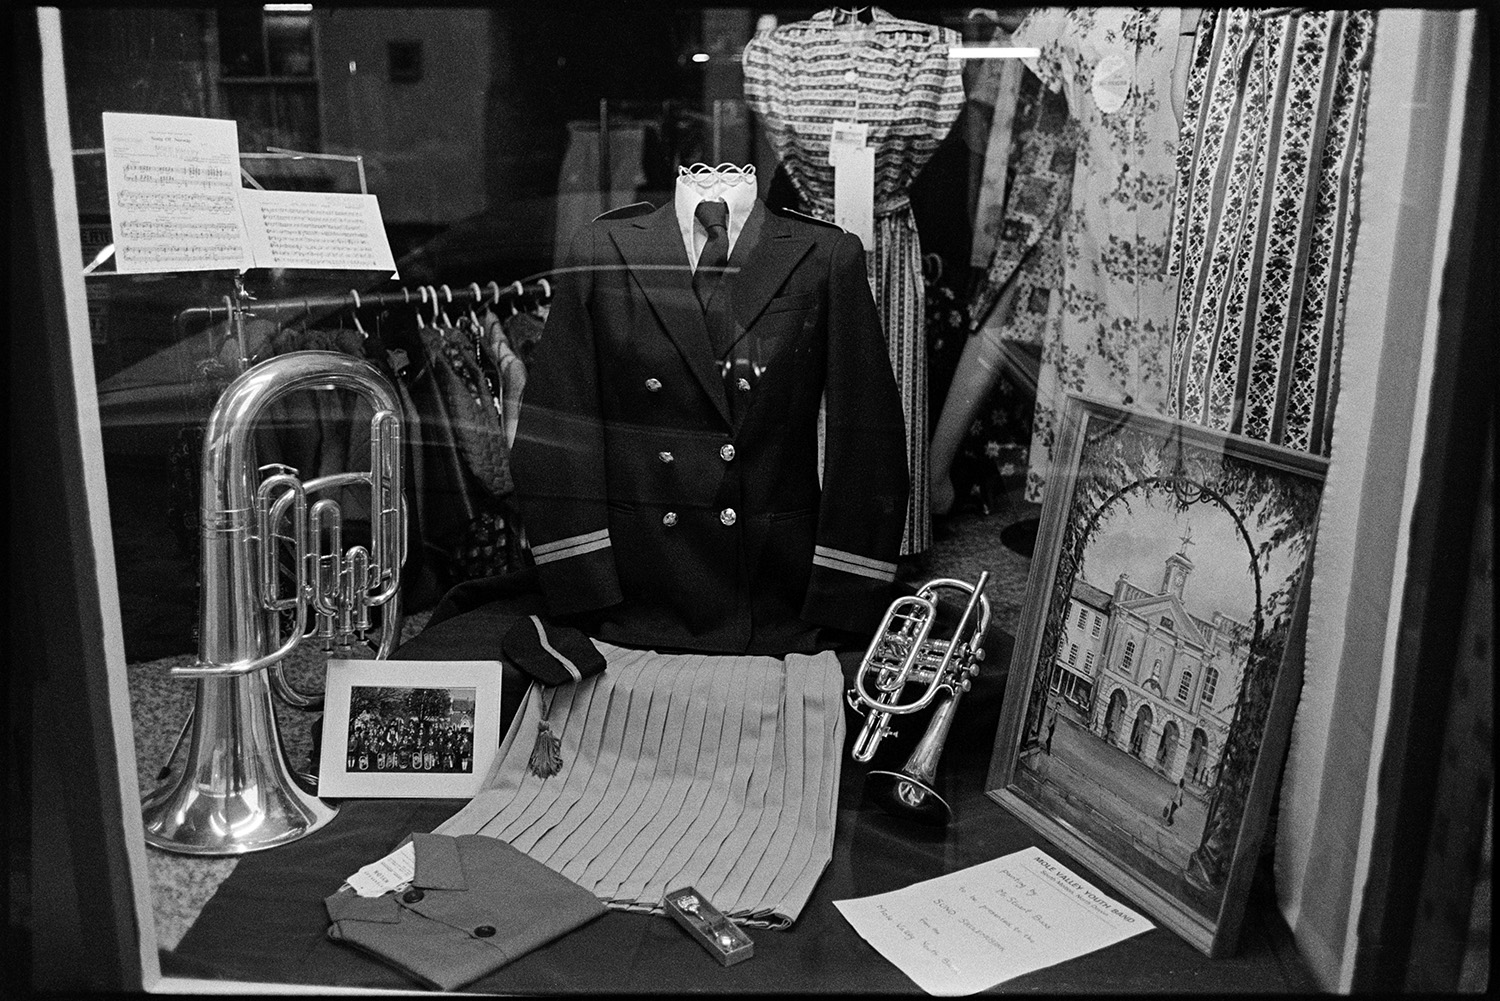 Shop window decorated for fair. 
[A shop window decorated with two brass musical instruments, a band member jacket, pictures and clothes in South Molton for the South Molton Fair.]